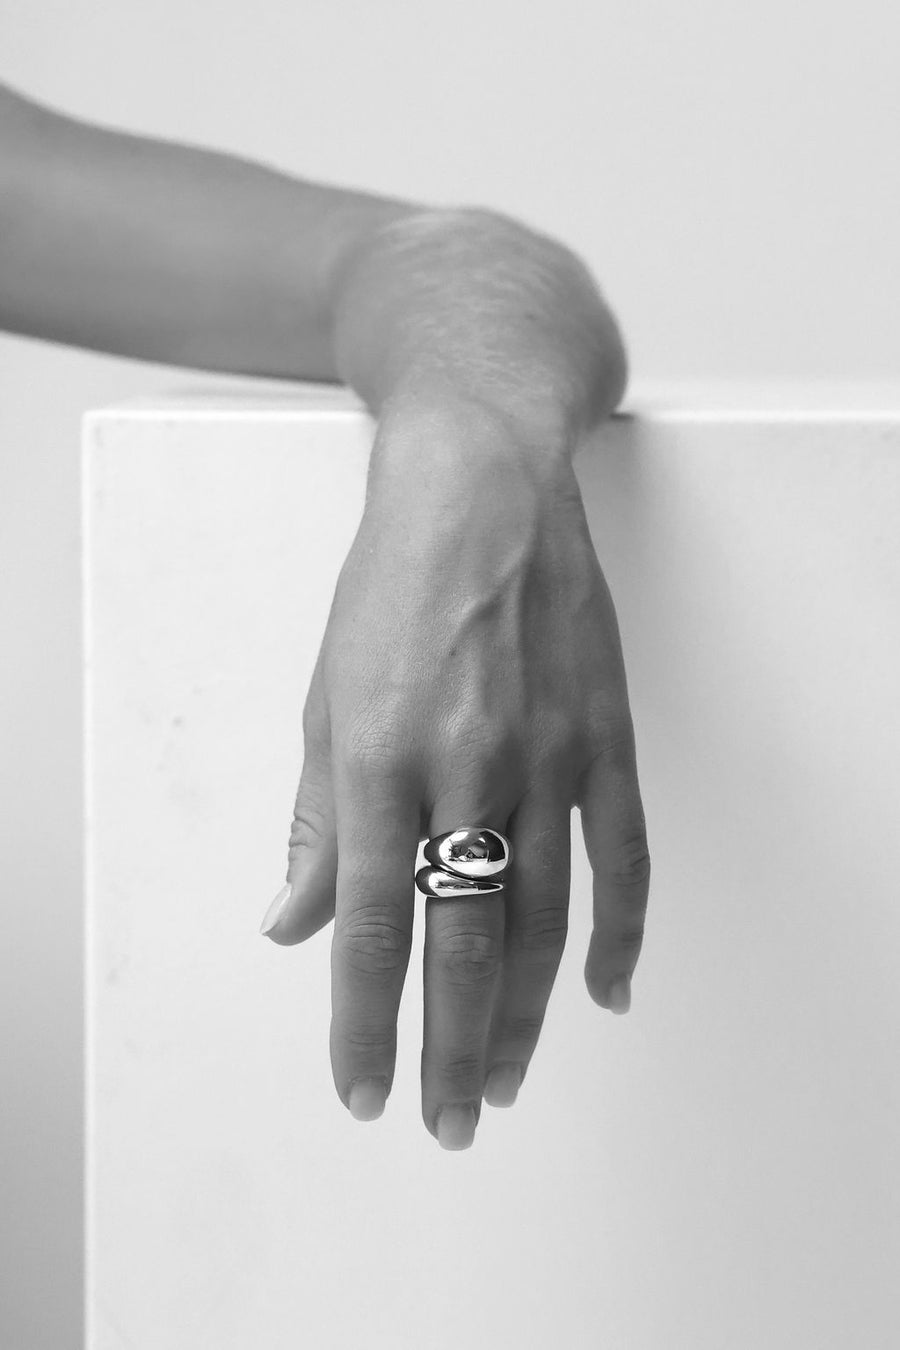 A black and white image of a hand wearing two chunky dome rings on the middle finger